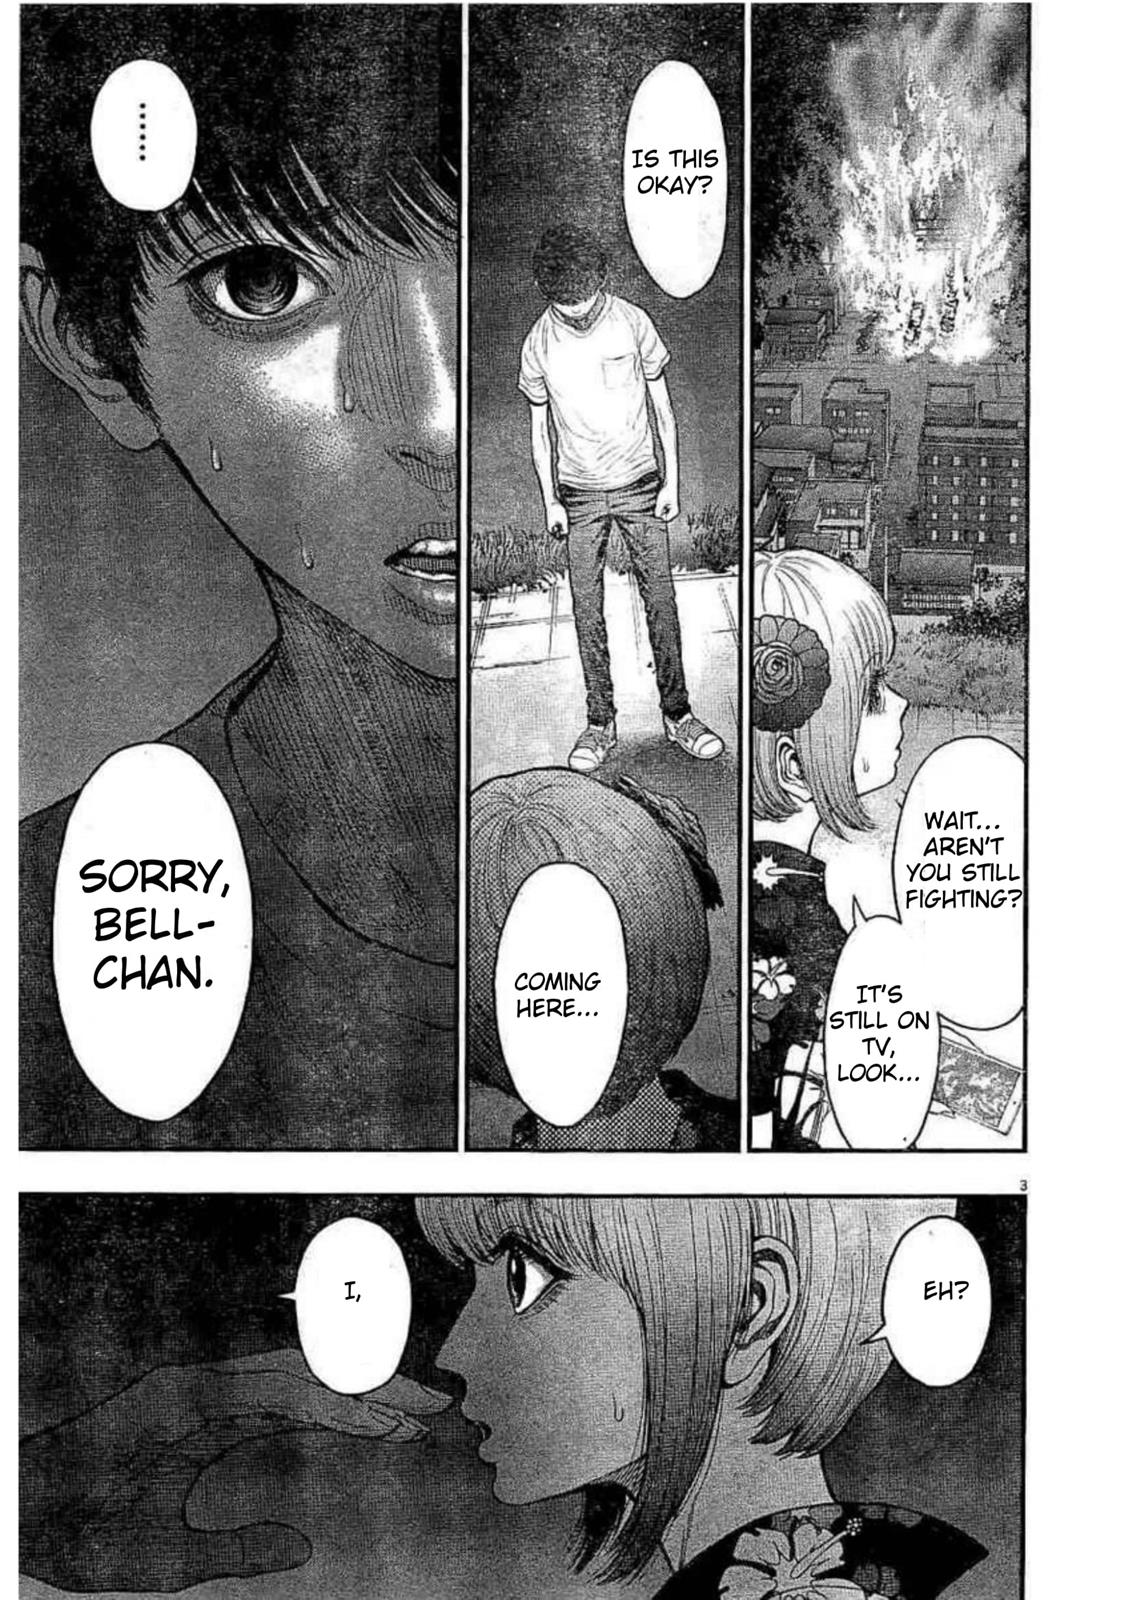  Chapter 30 image 004